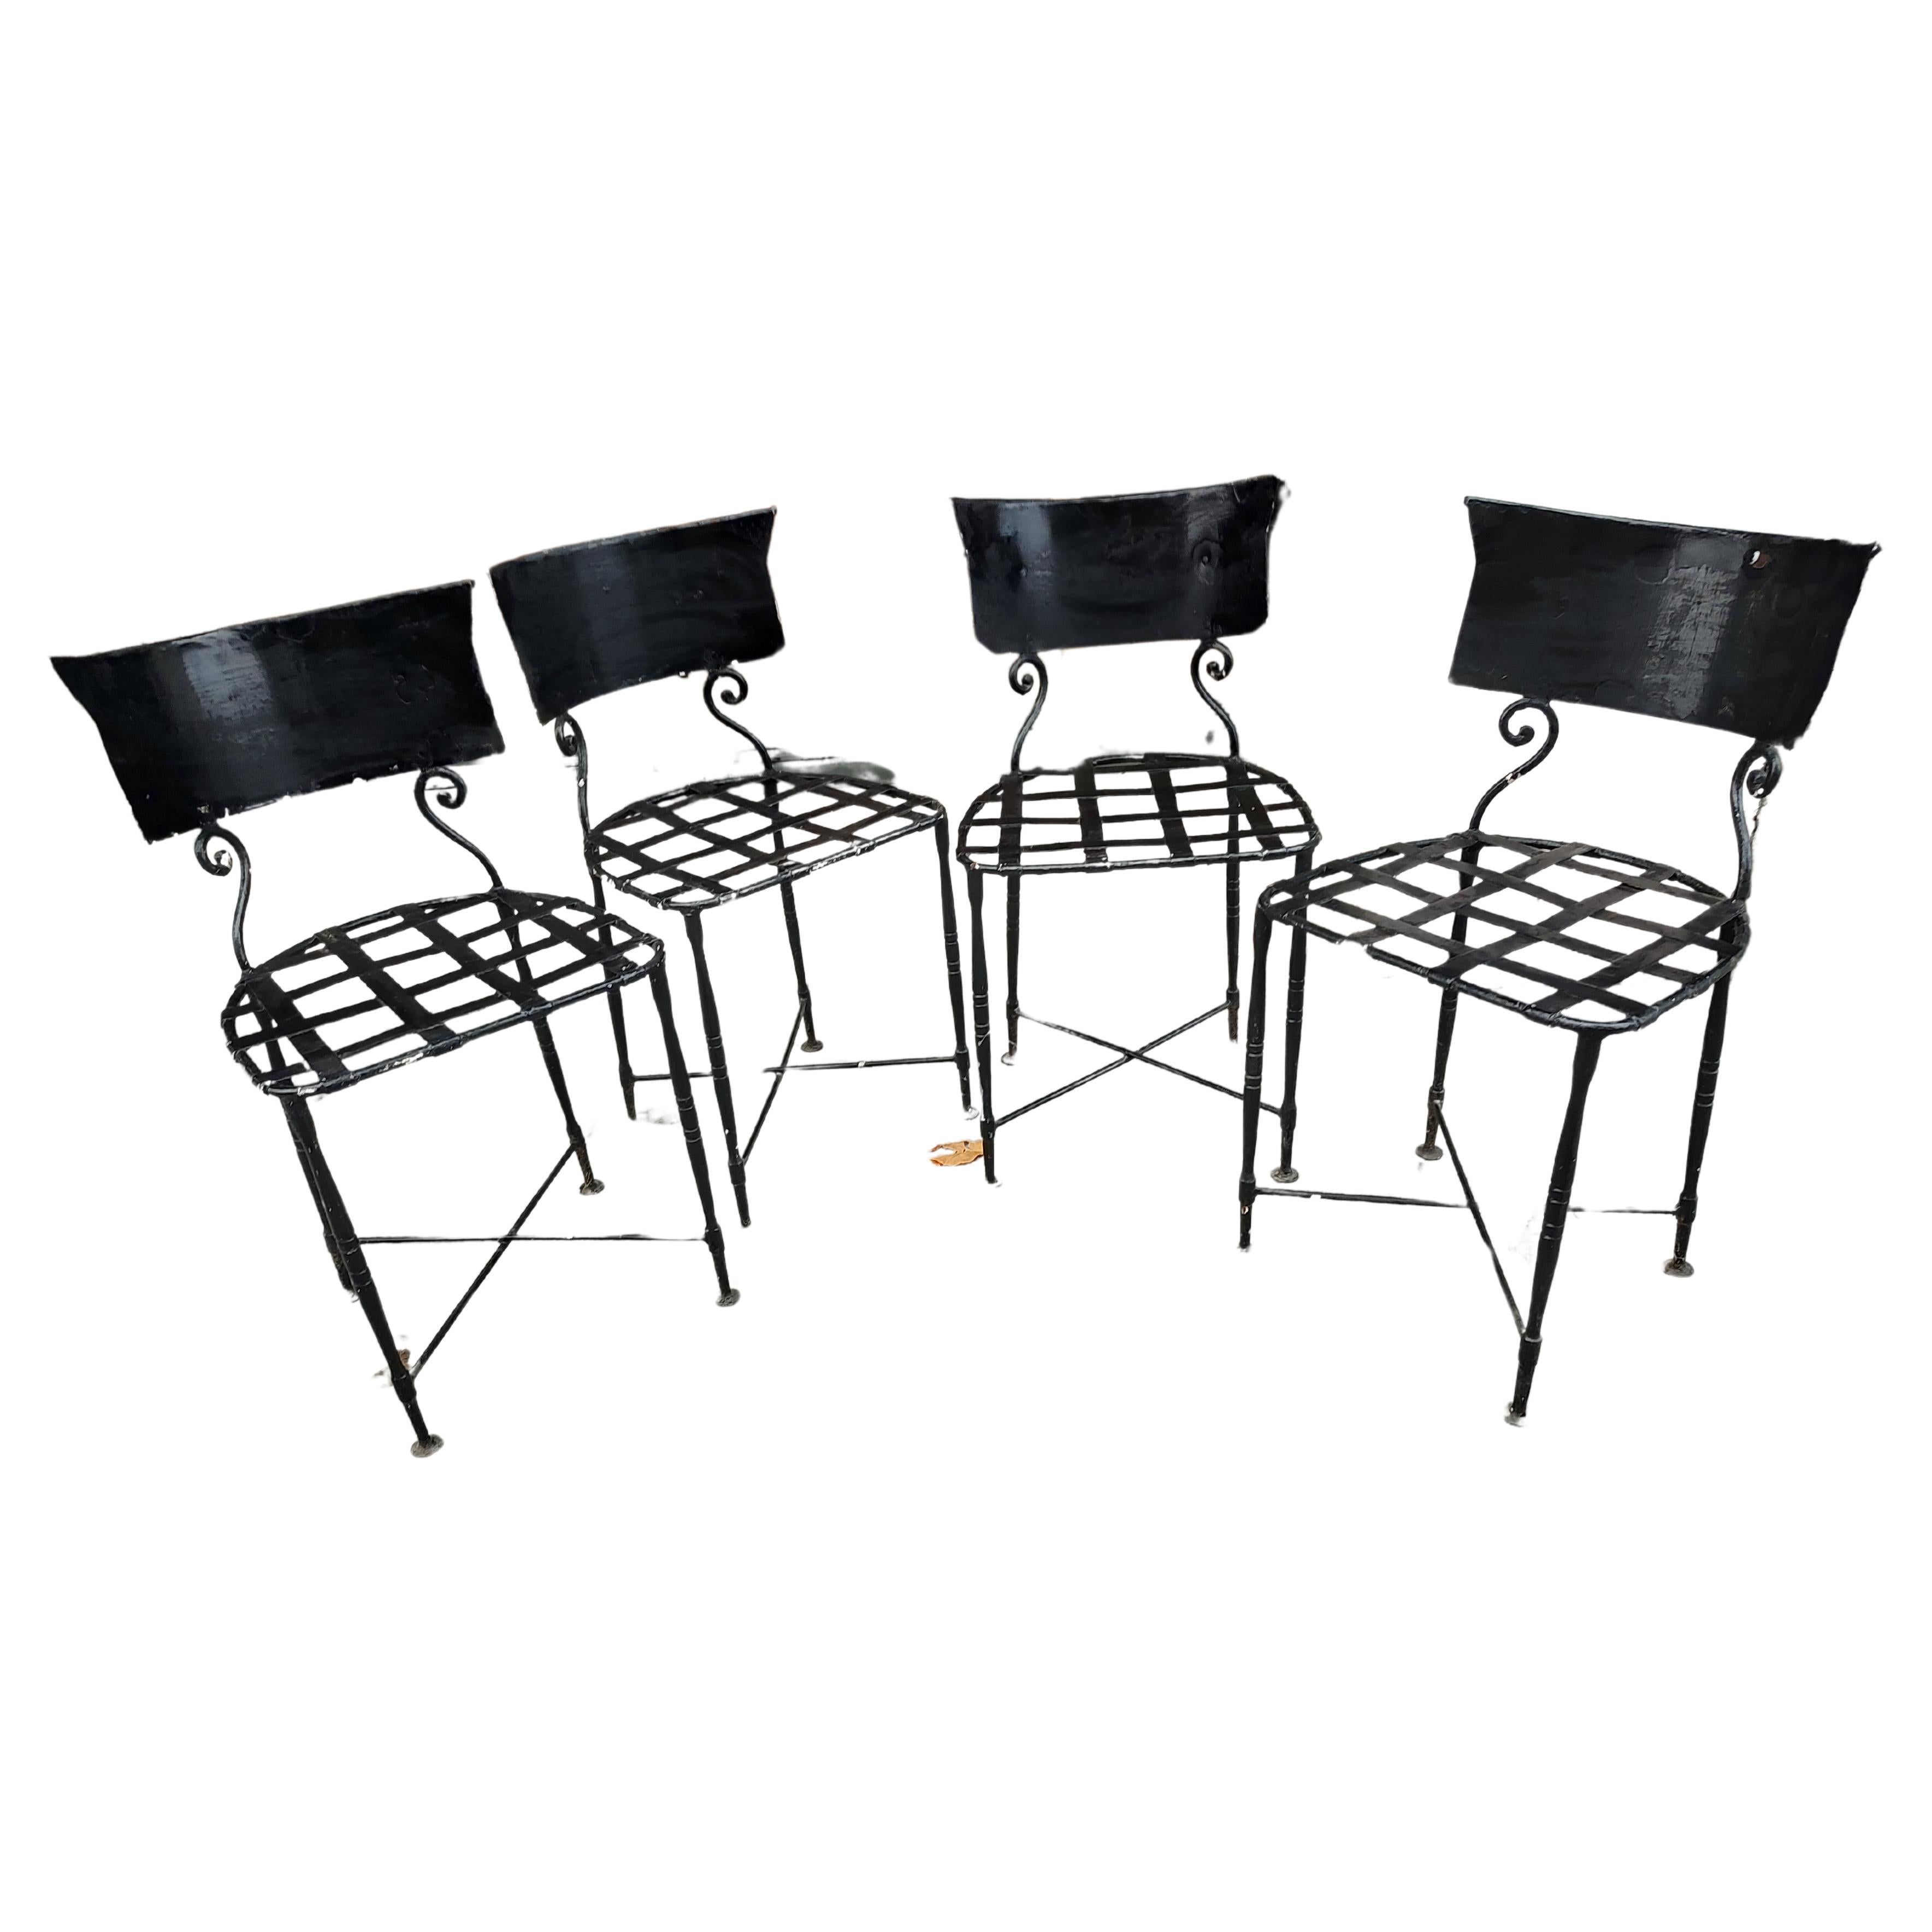 Fabulous and a very special set of 4 hand crafted French Iron outdoor patio garden chairs. Hand wrought with charming round legs, strap seats with scroll work connecting the curved solid seat backs. Cross stretcher for stability. Multiple coats of